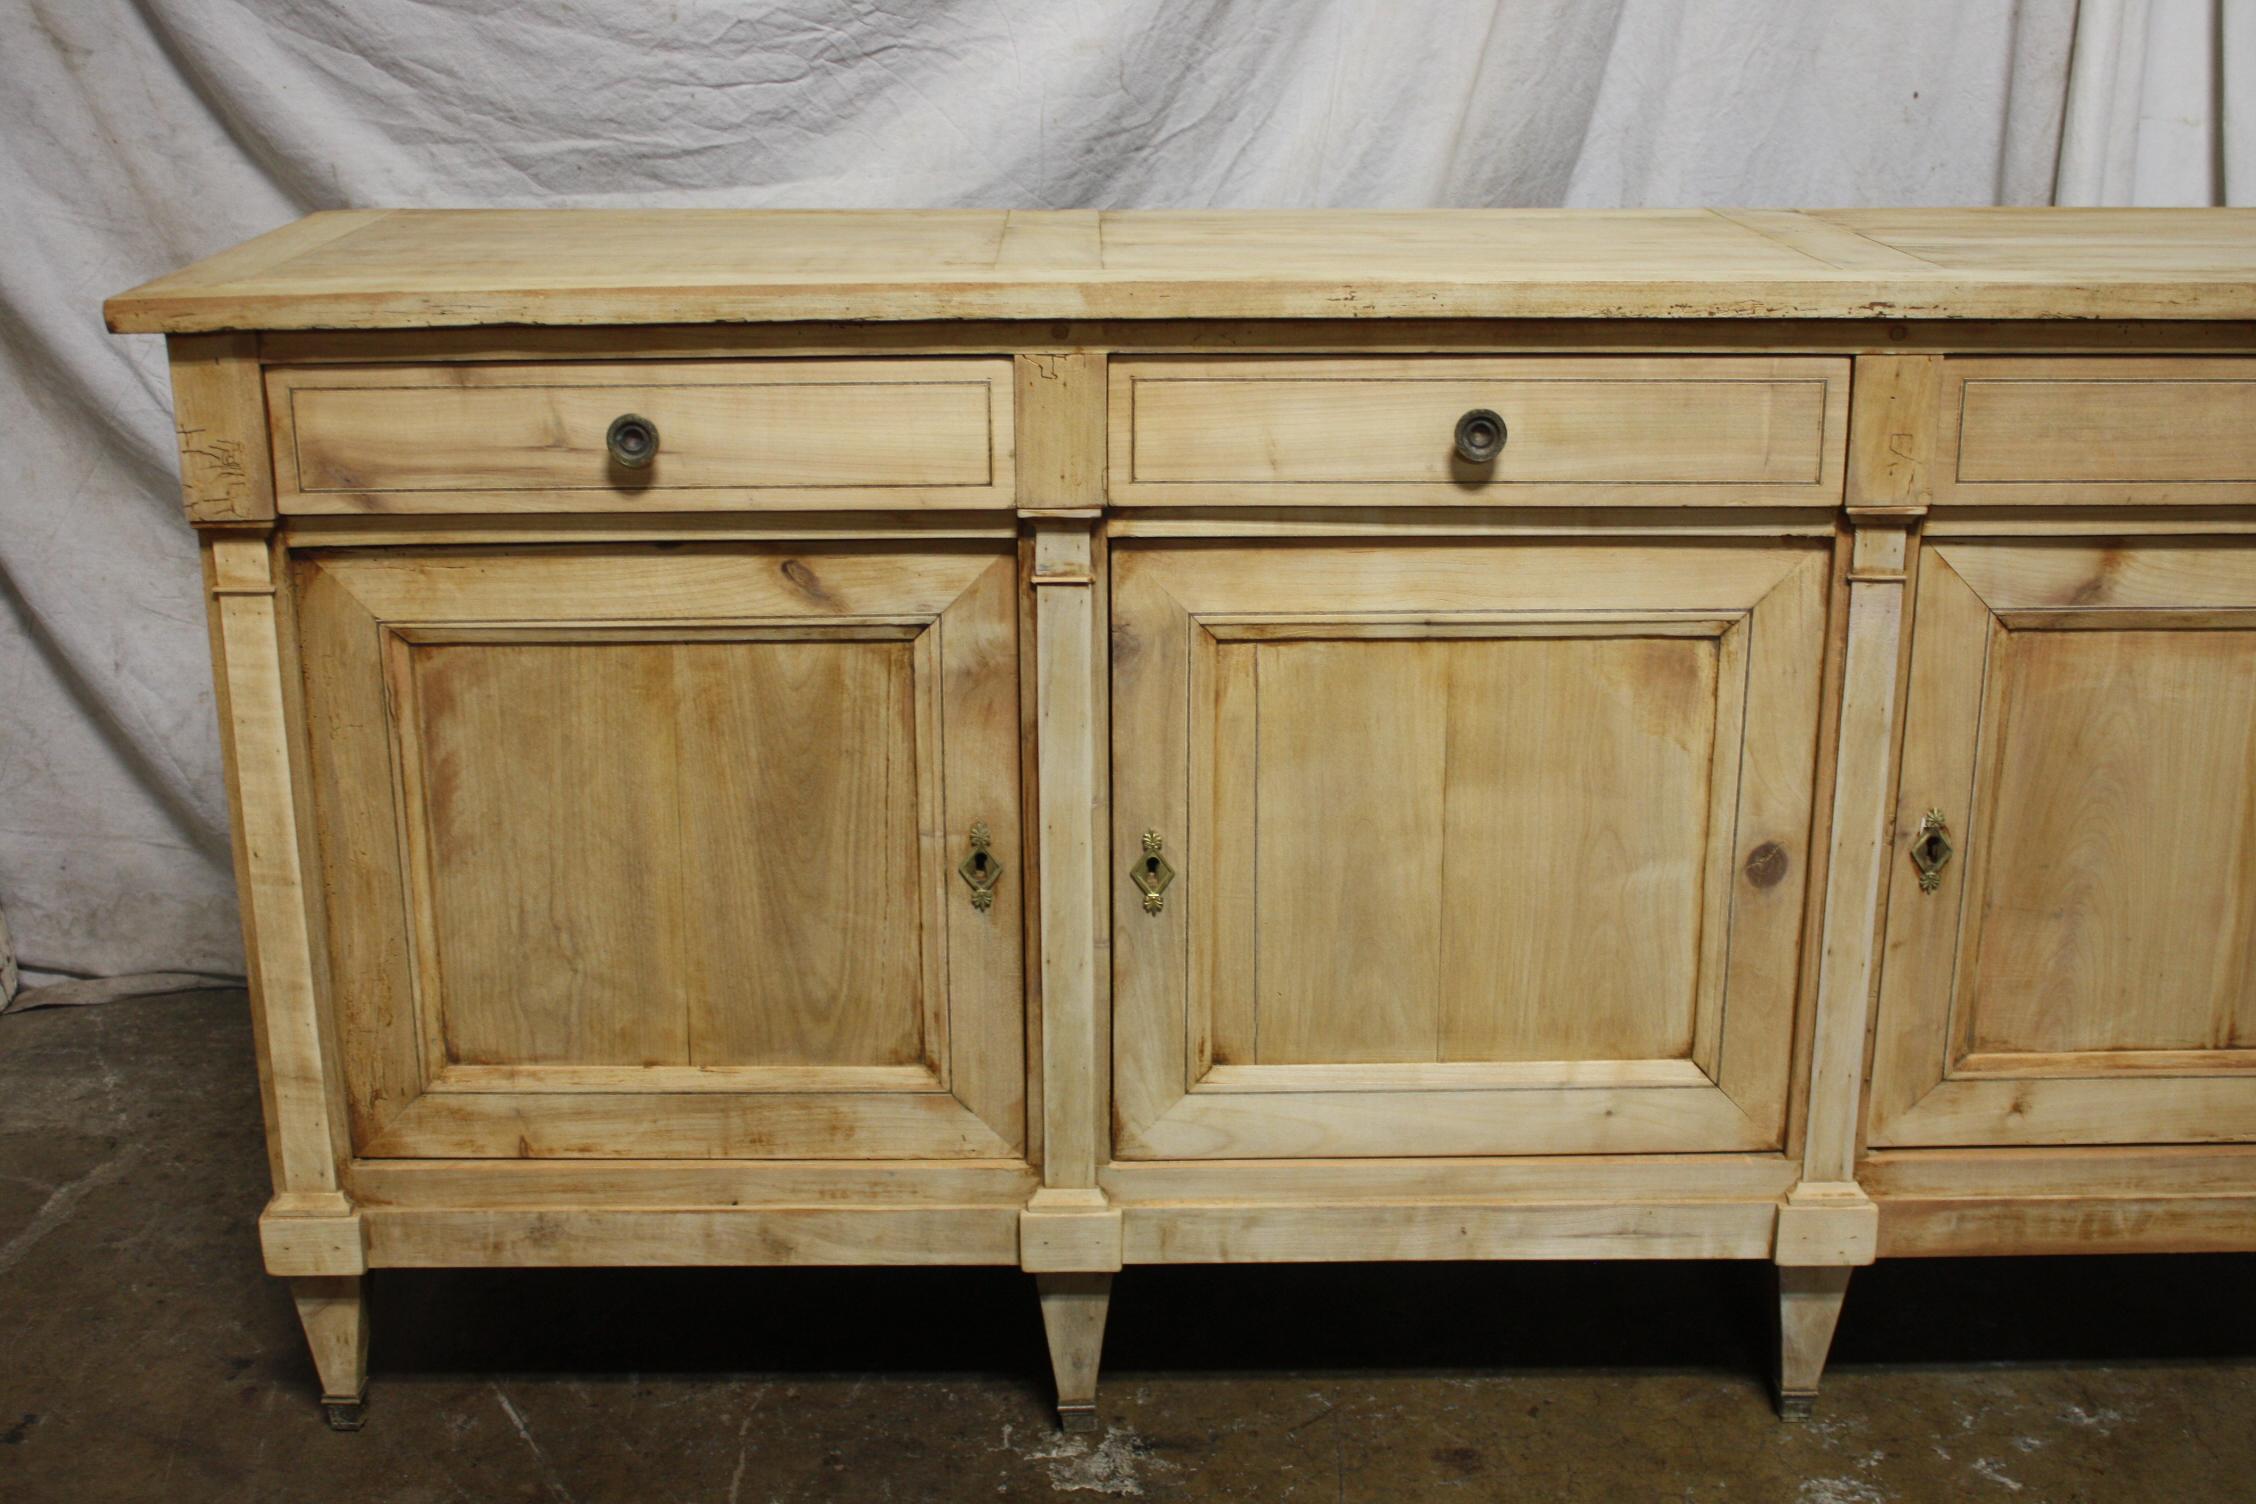 Beautiful charming sideboard, small size and narrow. Easy to place anywhere.